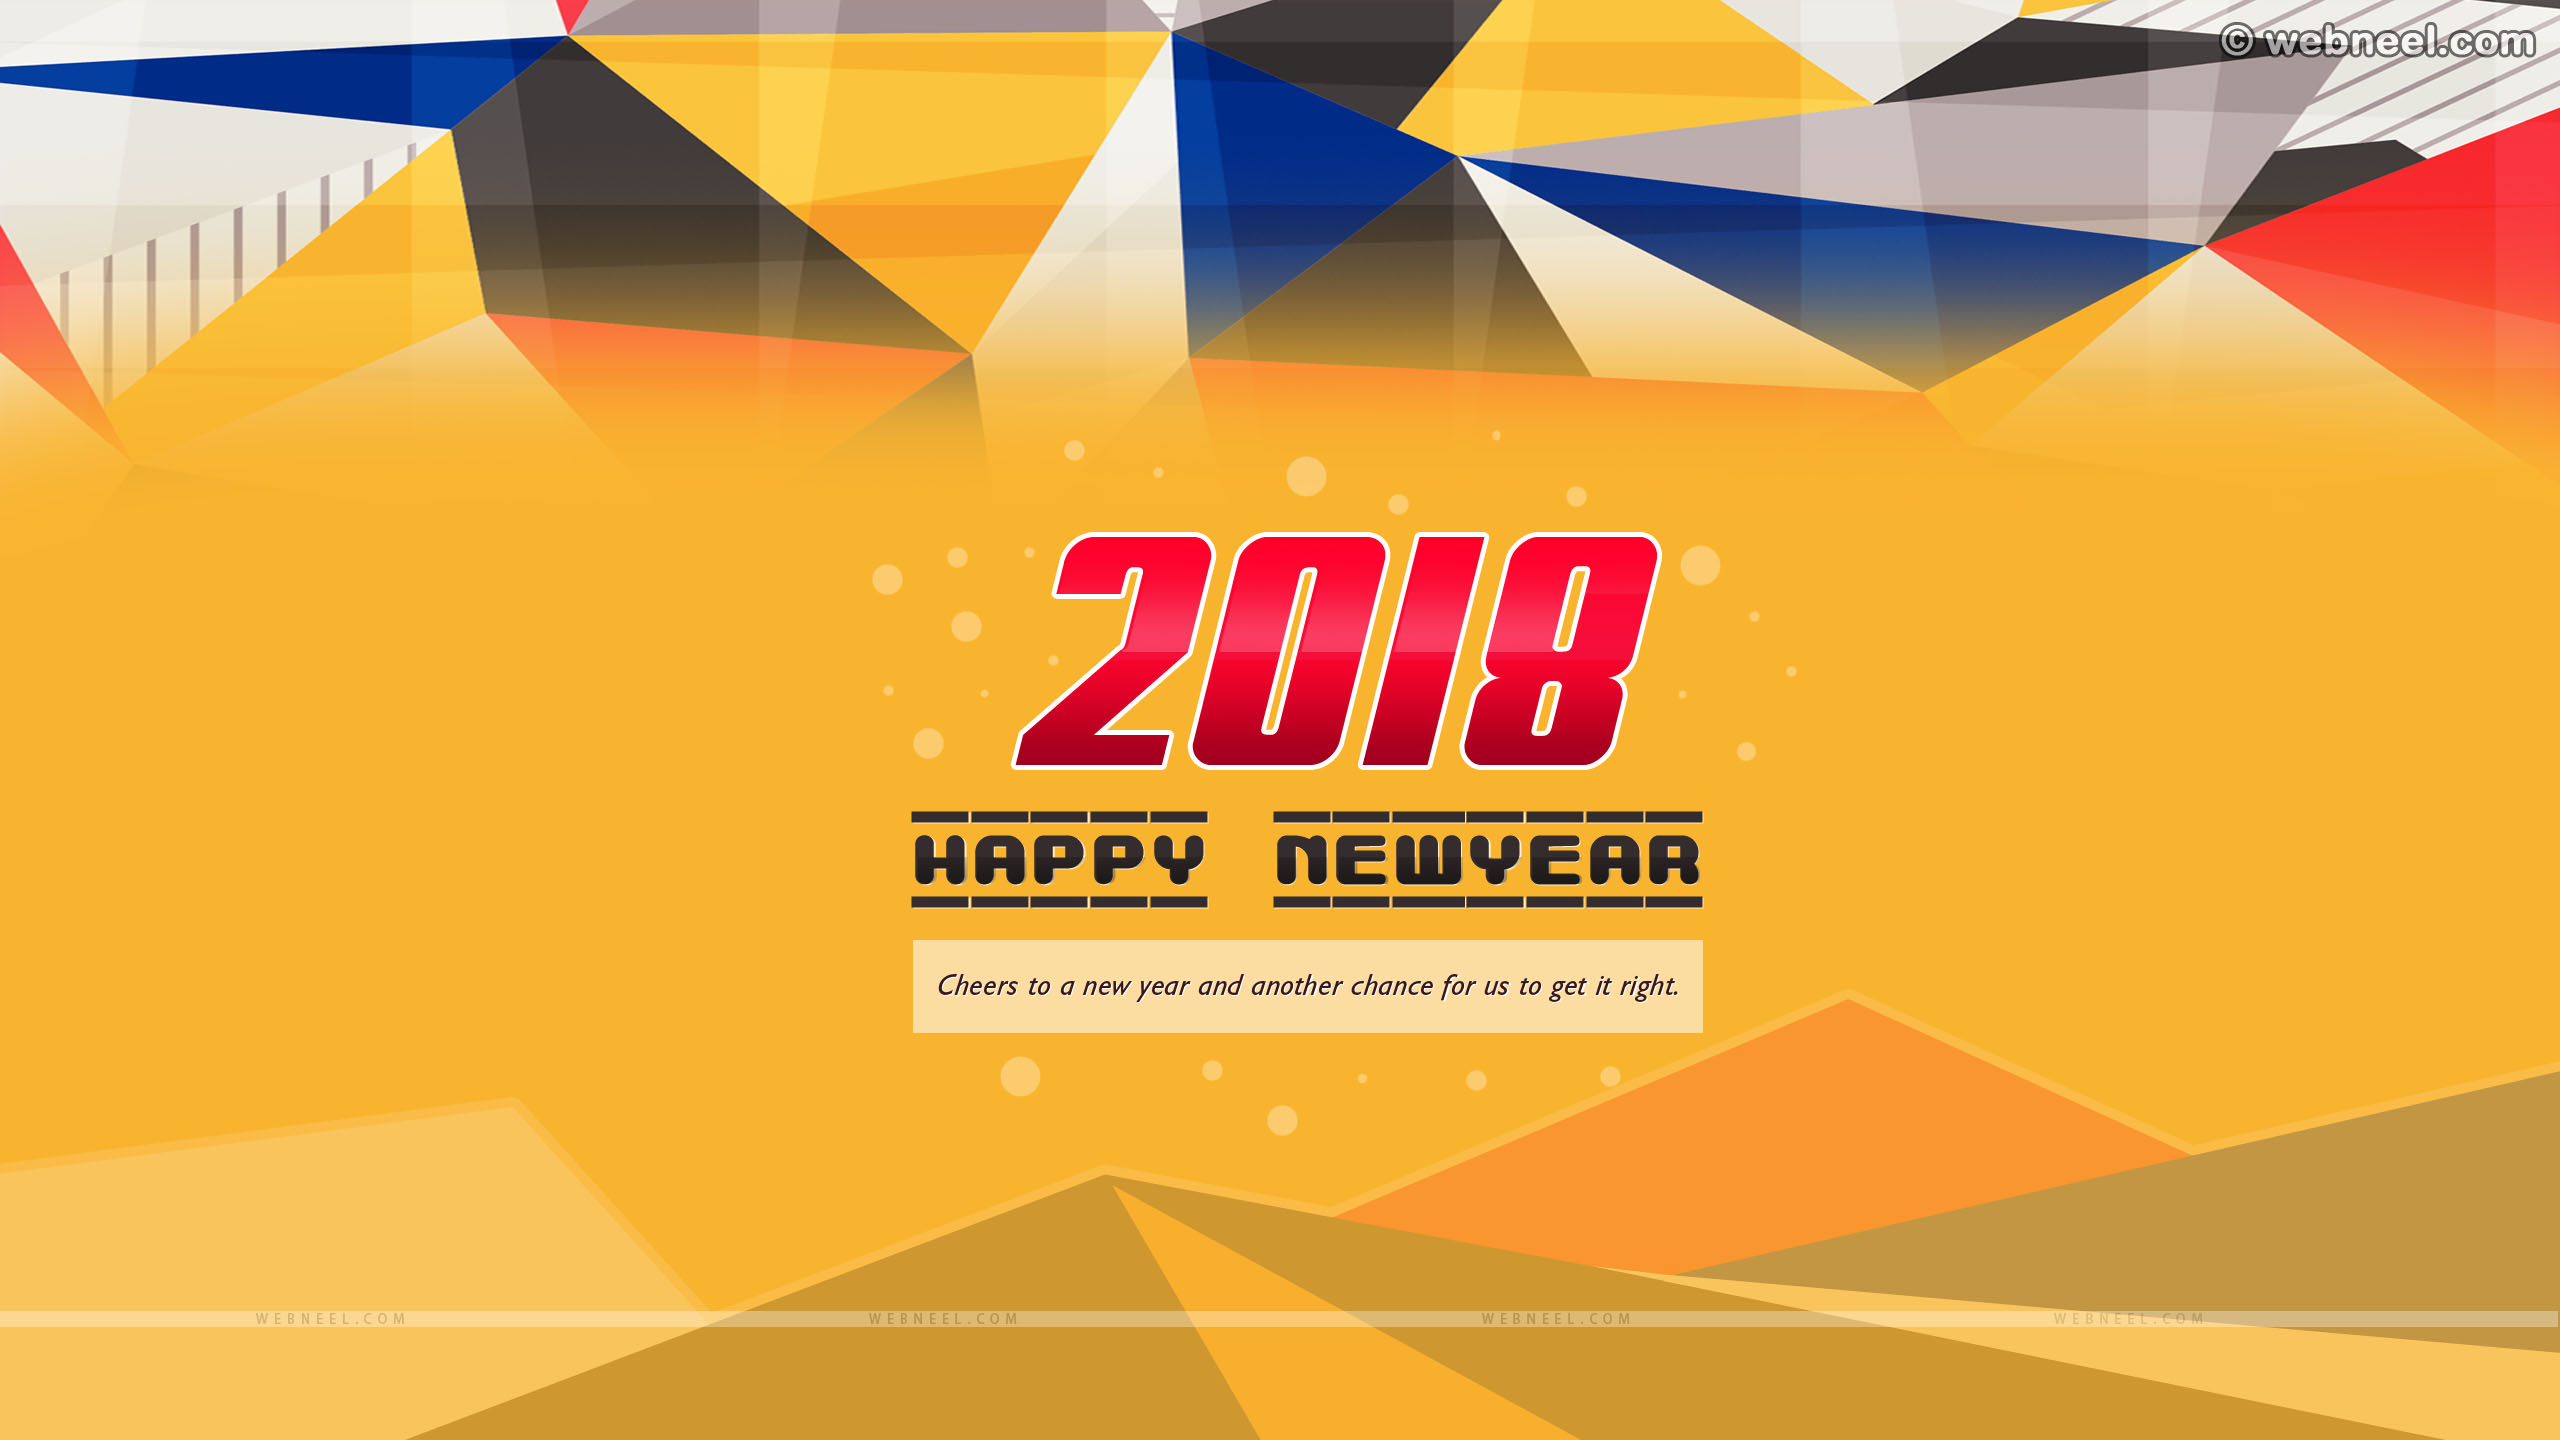 New Year, 2018 Wallpaper, Hd New Years Wallpapers, Happy New Year Wallpapers, Happy New Year 2018, Santa Wallpaper